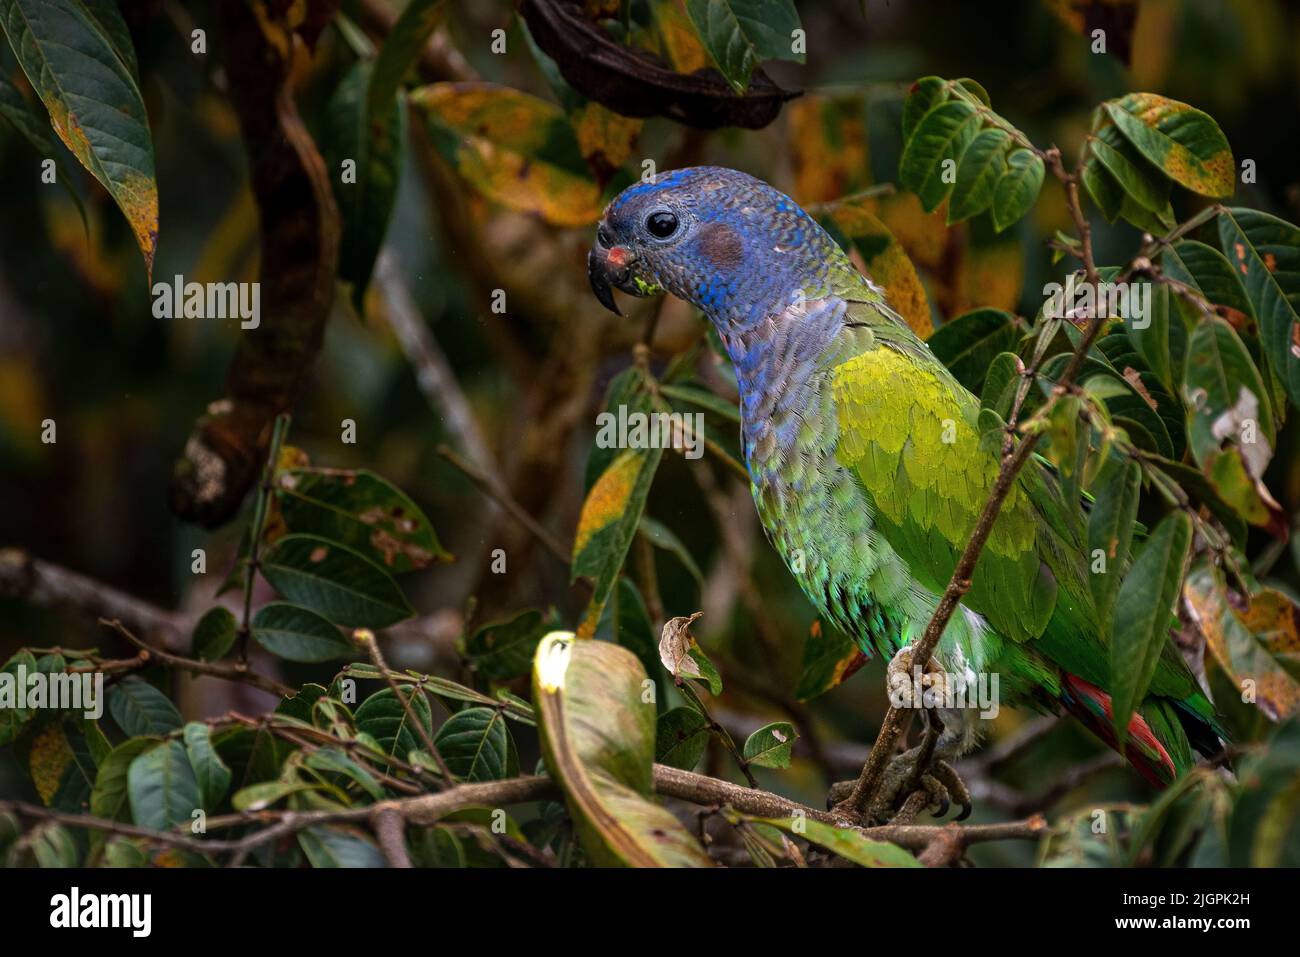 Blue headed parrot perched in a tree in the rain forest of Panama great place for  birdwatching Stock Photo